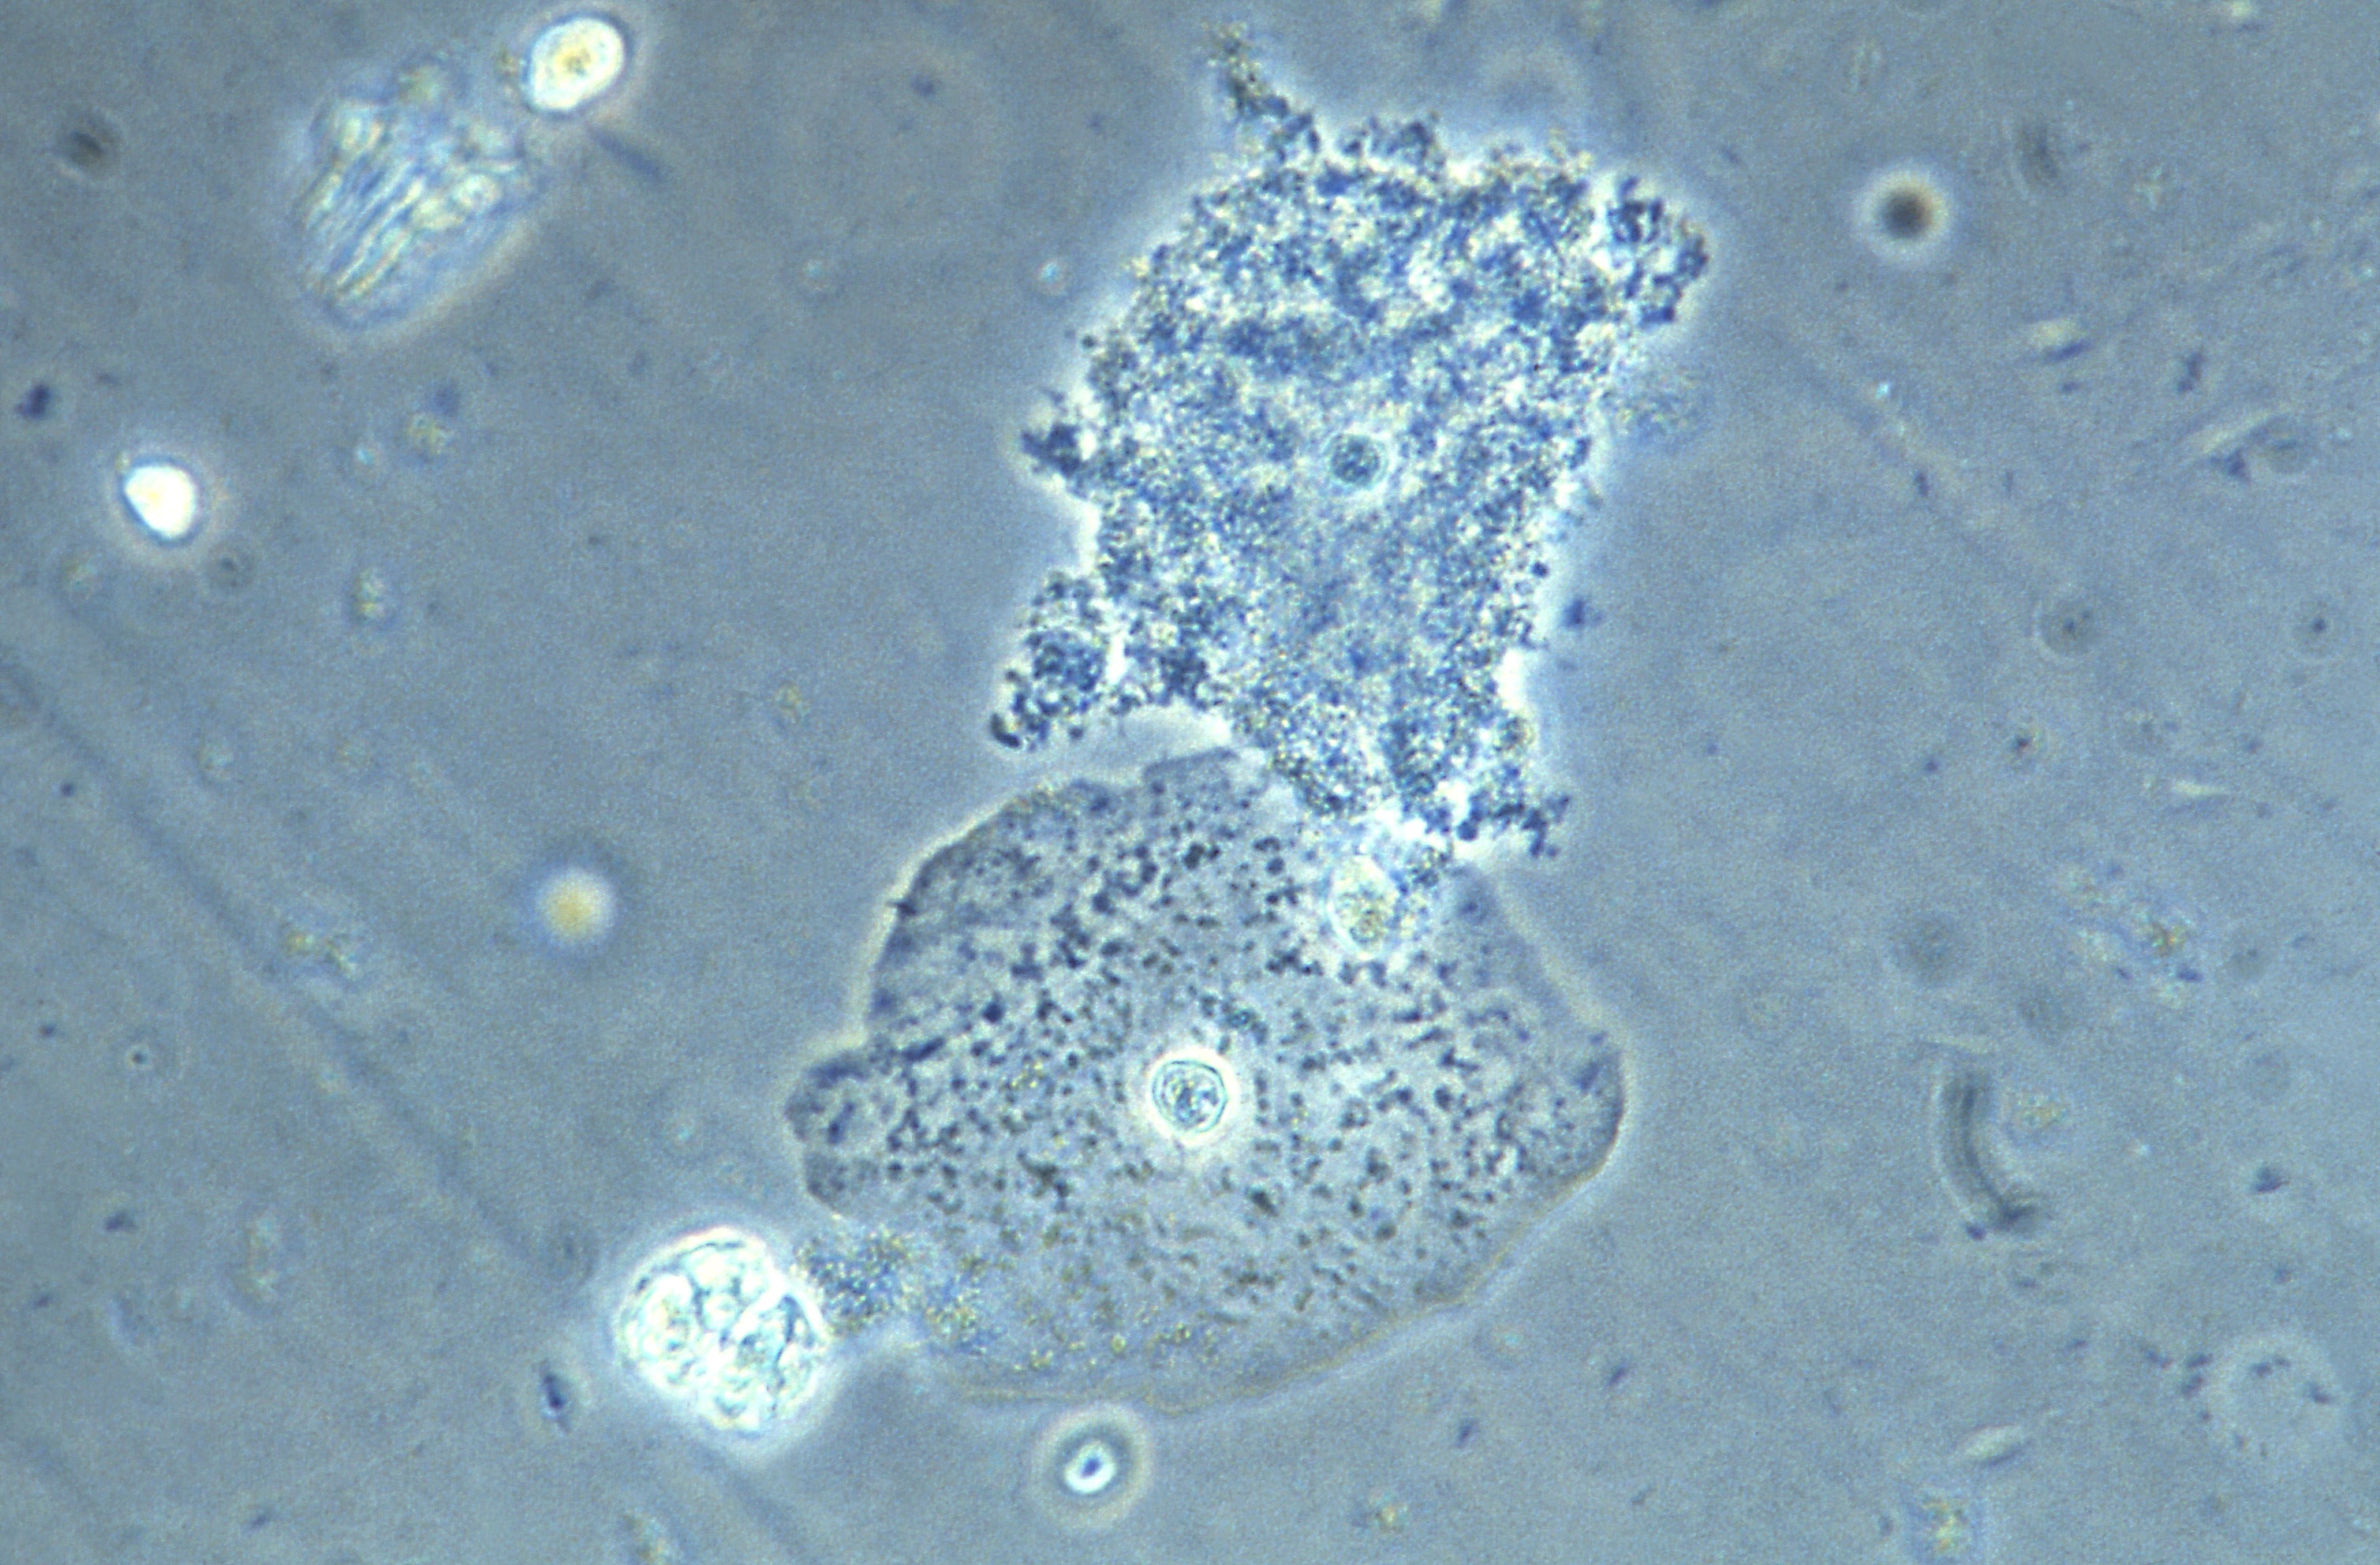 A micrograph of vaginal cells collected from someone showing signs of bacterial vaginosis. (Image: CDC/M. Rein)